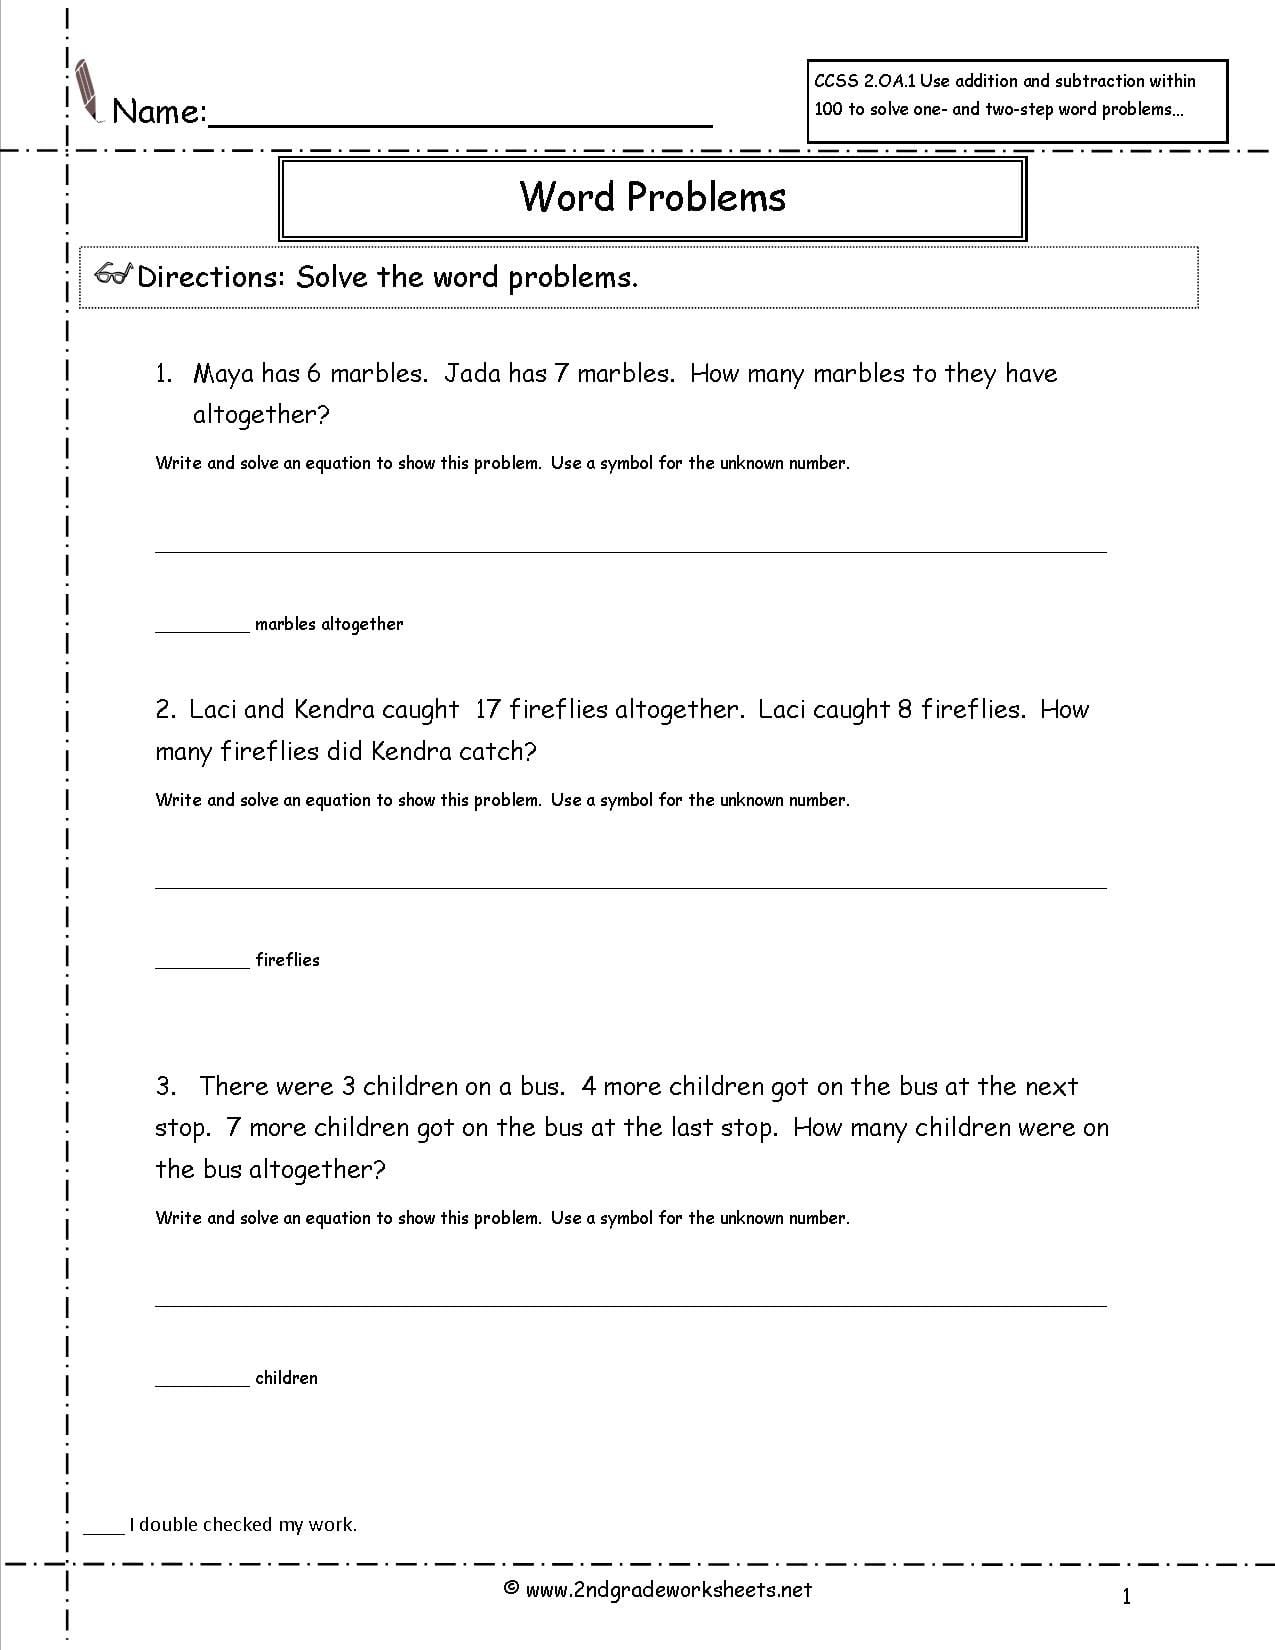 Word Problems Worksheets  Kids Activities Along With Simple Interest Word Problems Worksheet